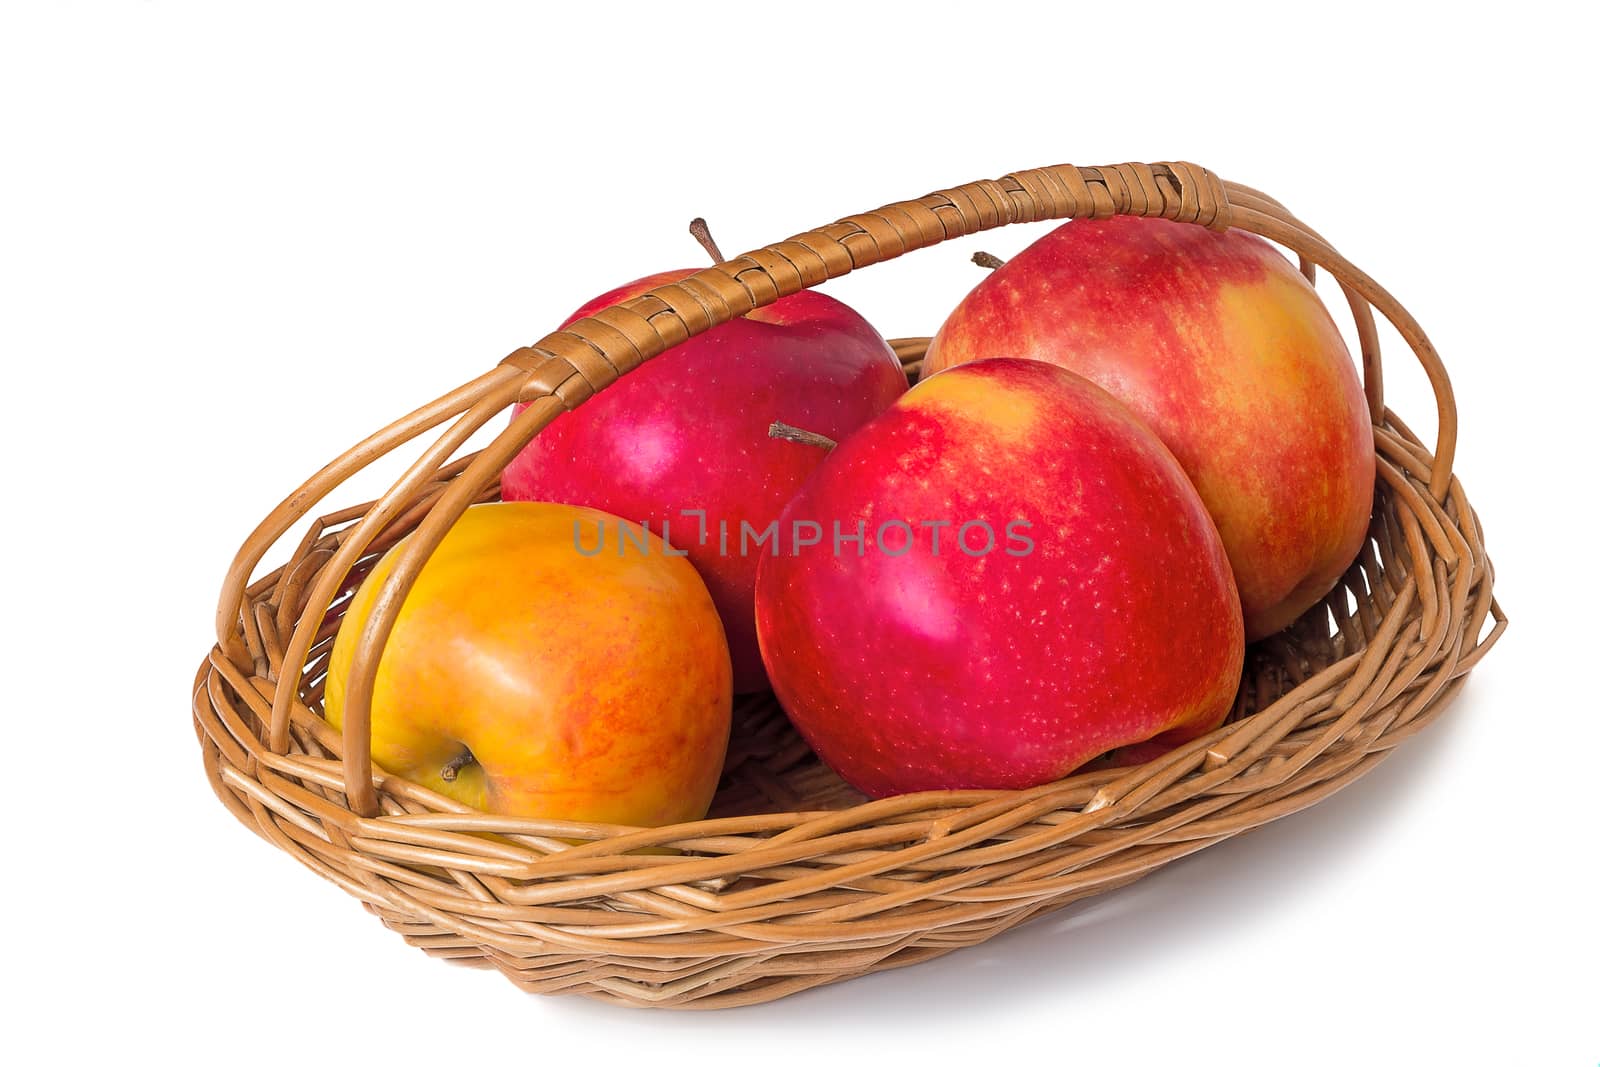 Big apples in wattled to a basket on a white background by georgina198